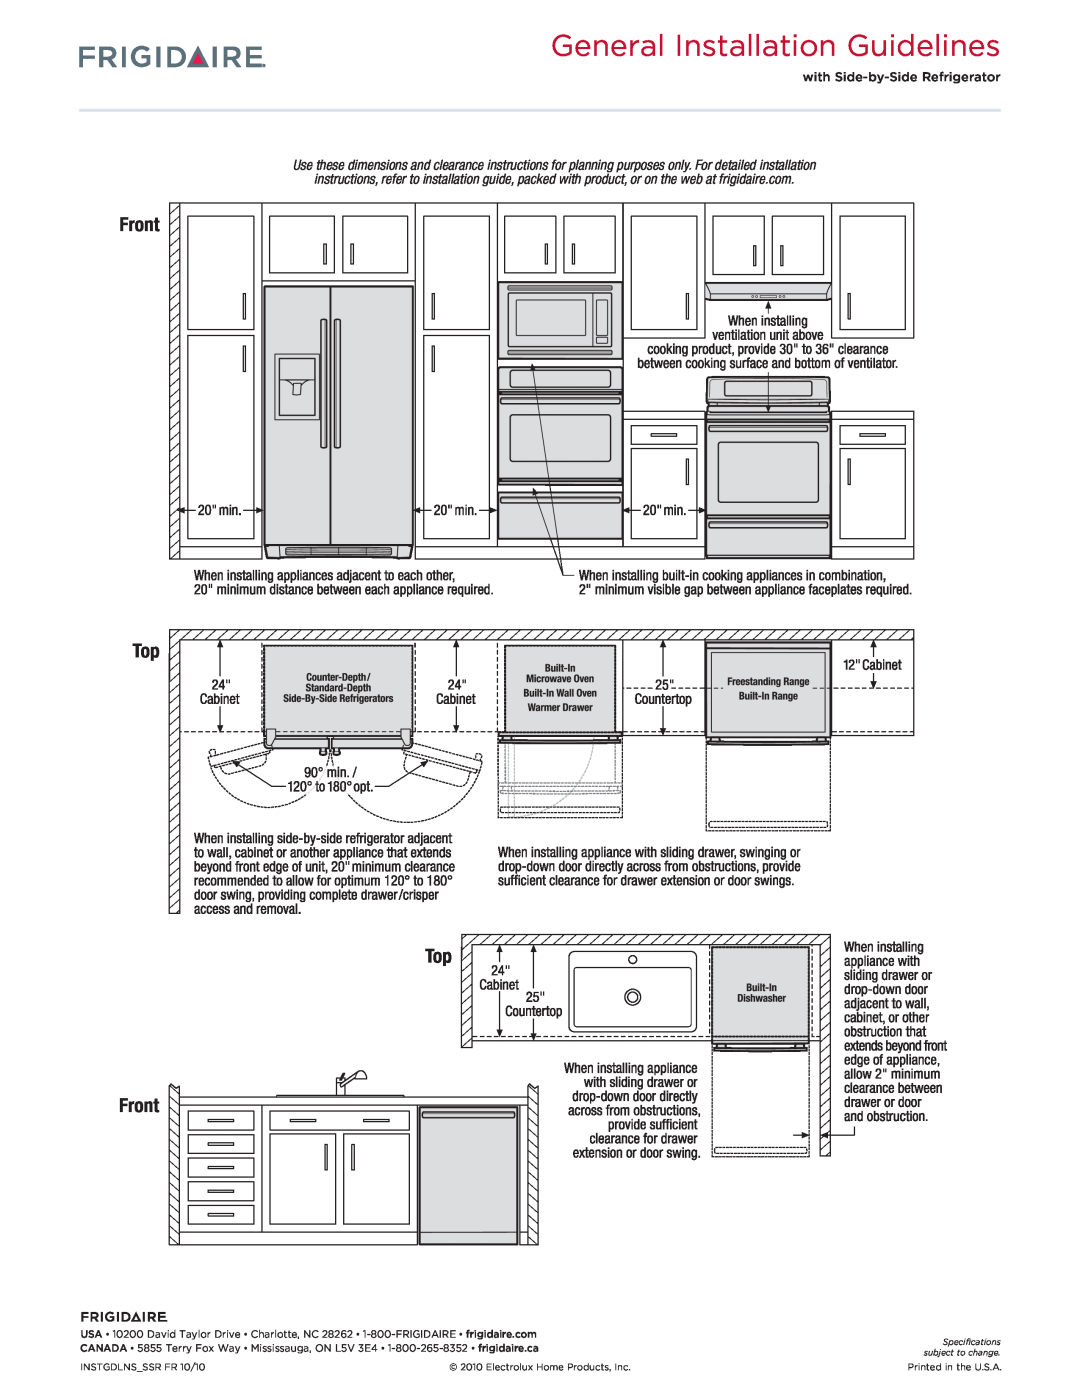 Frigidaire FFHS2311L W/Q dimensions General Installation Guidelines, Top Front 